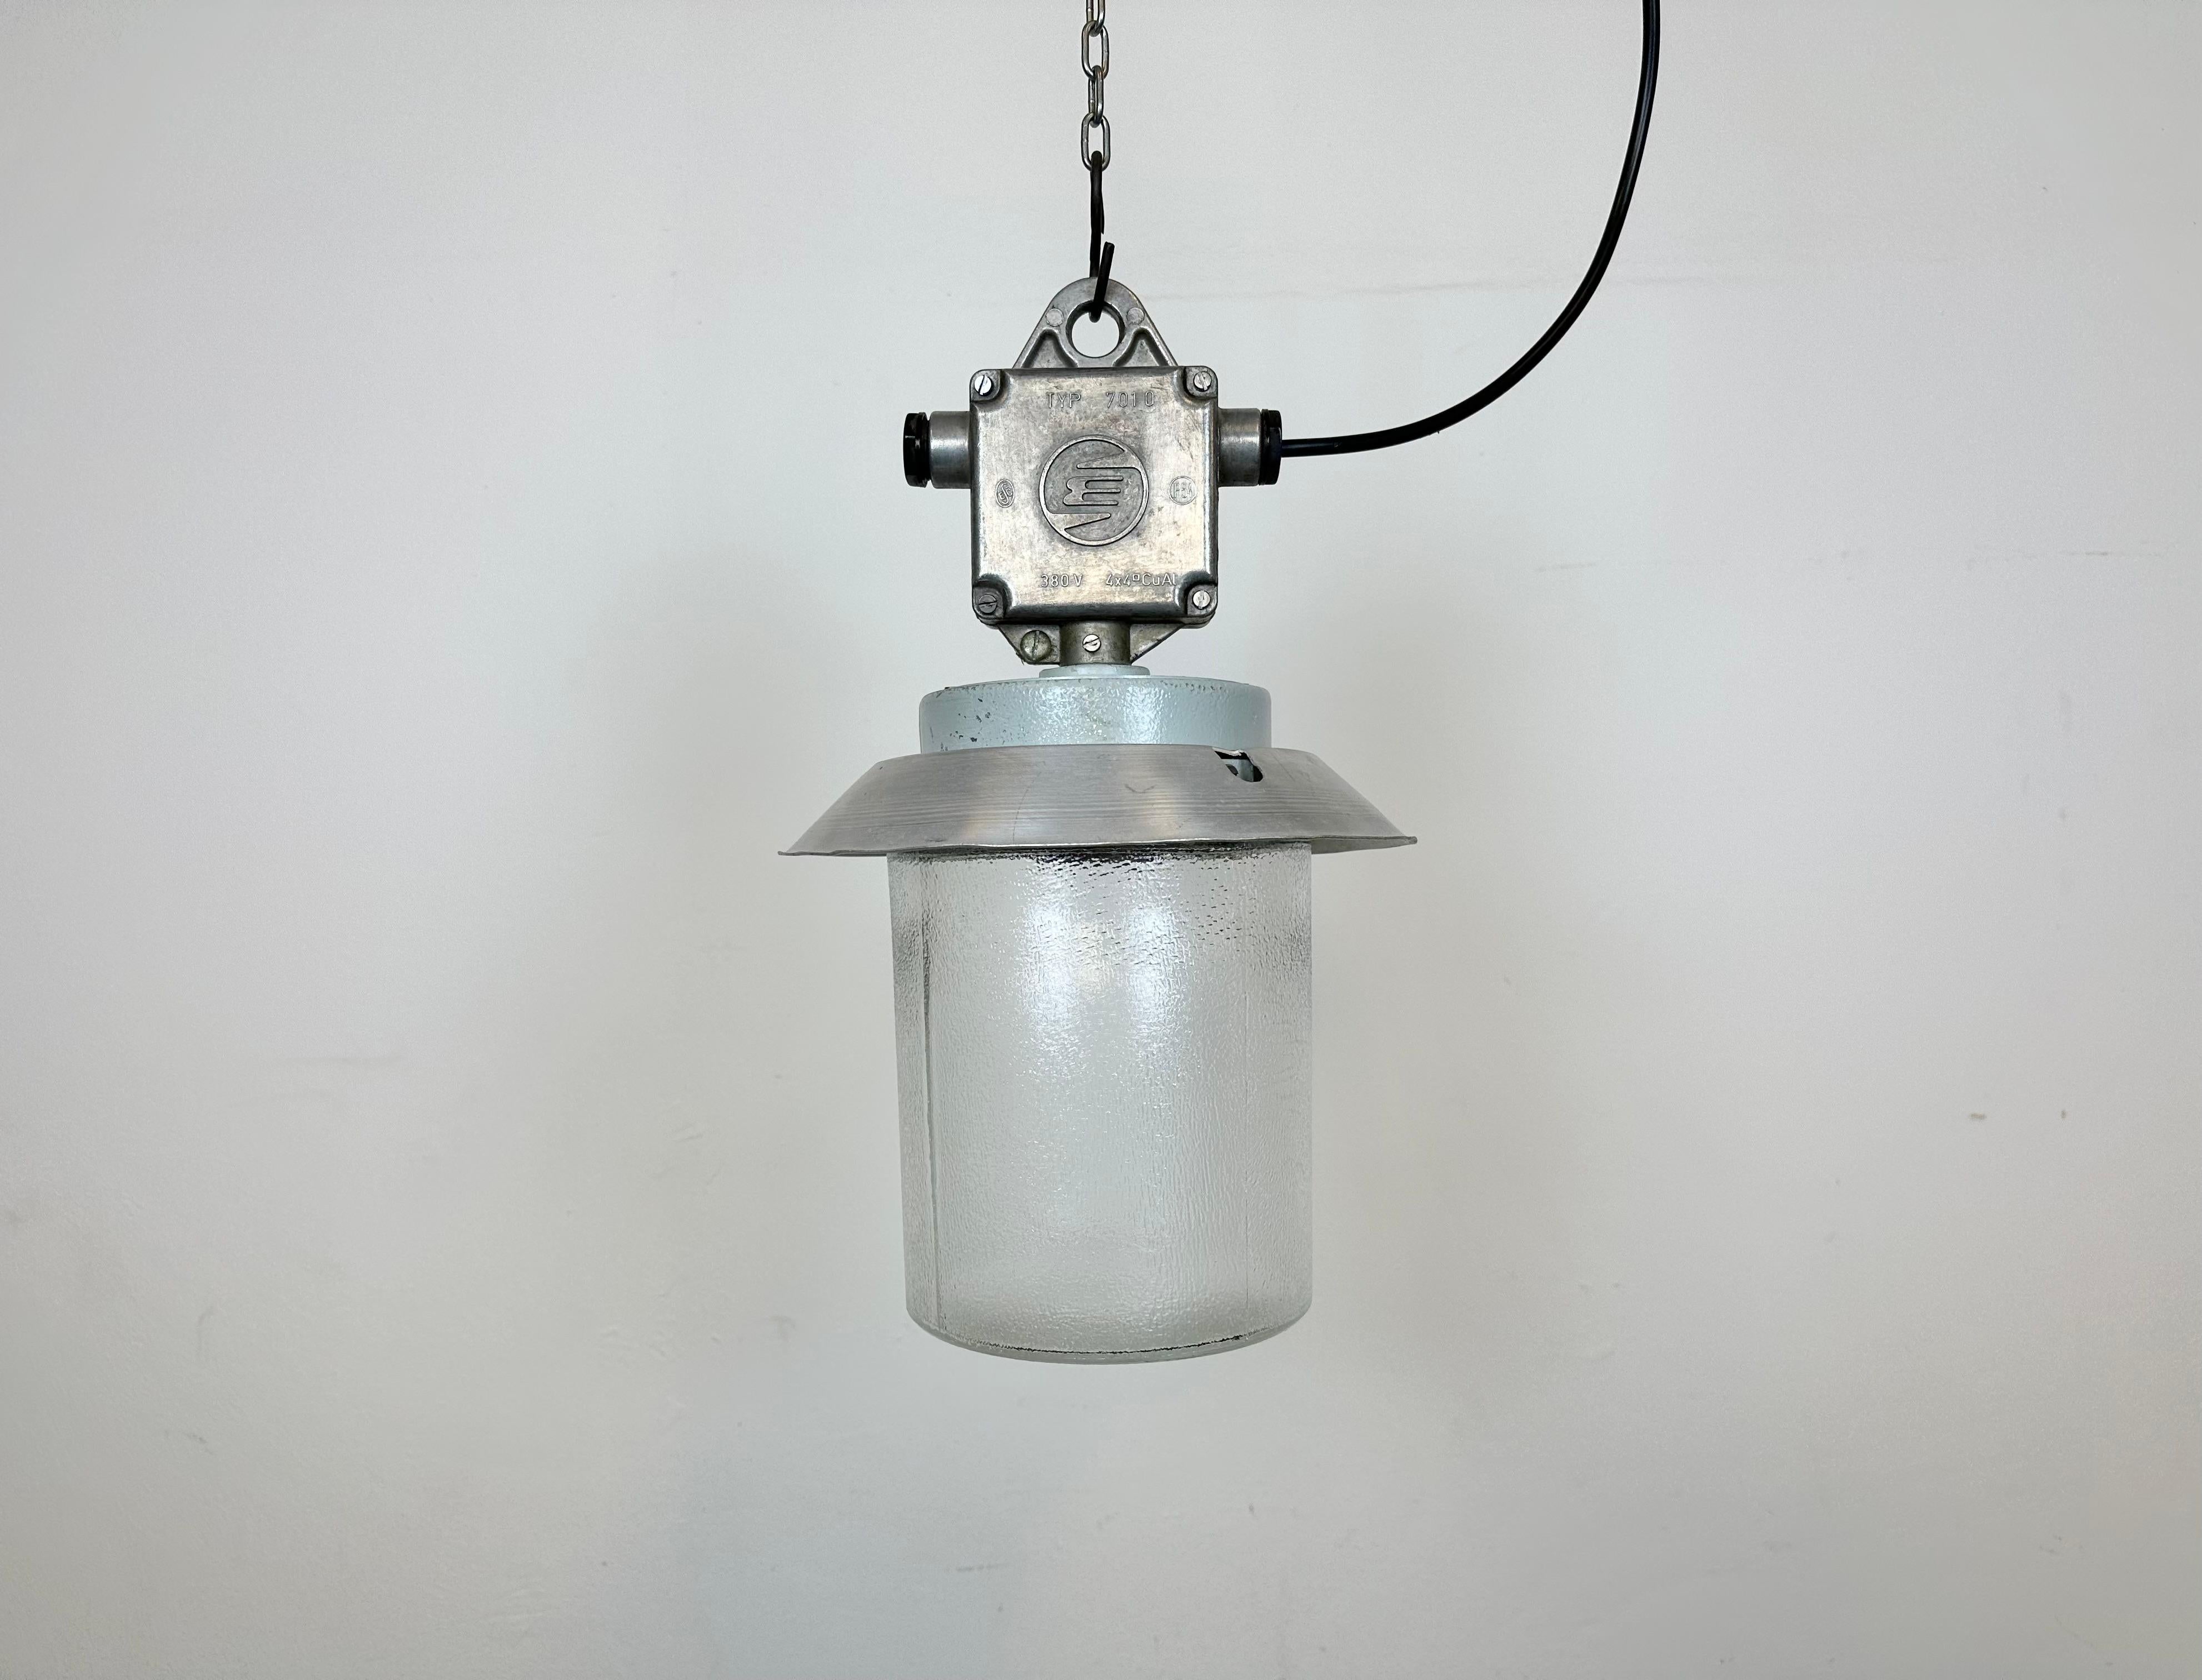 This Industrial hanging light was made by Elektrosvit in former Czechoslovakia during the 1970s. It features a cast aluminium top, an aluminium shade and a frosted glass cover. New porcelain socket requires standard E 27/ E26 light bulbs. New wire.